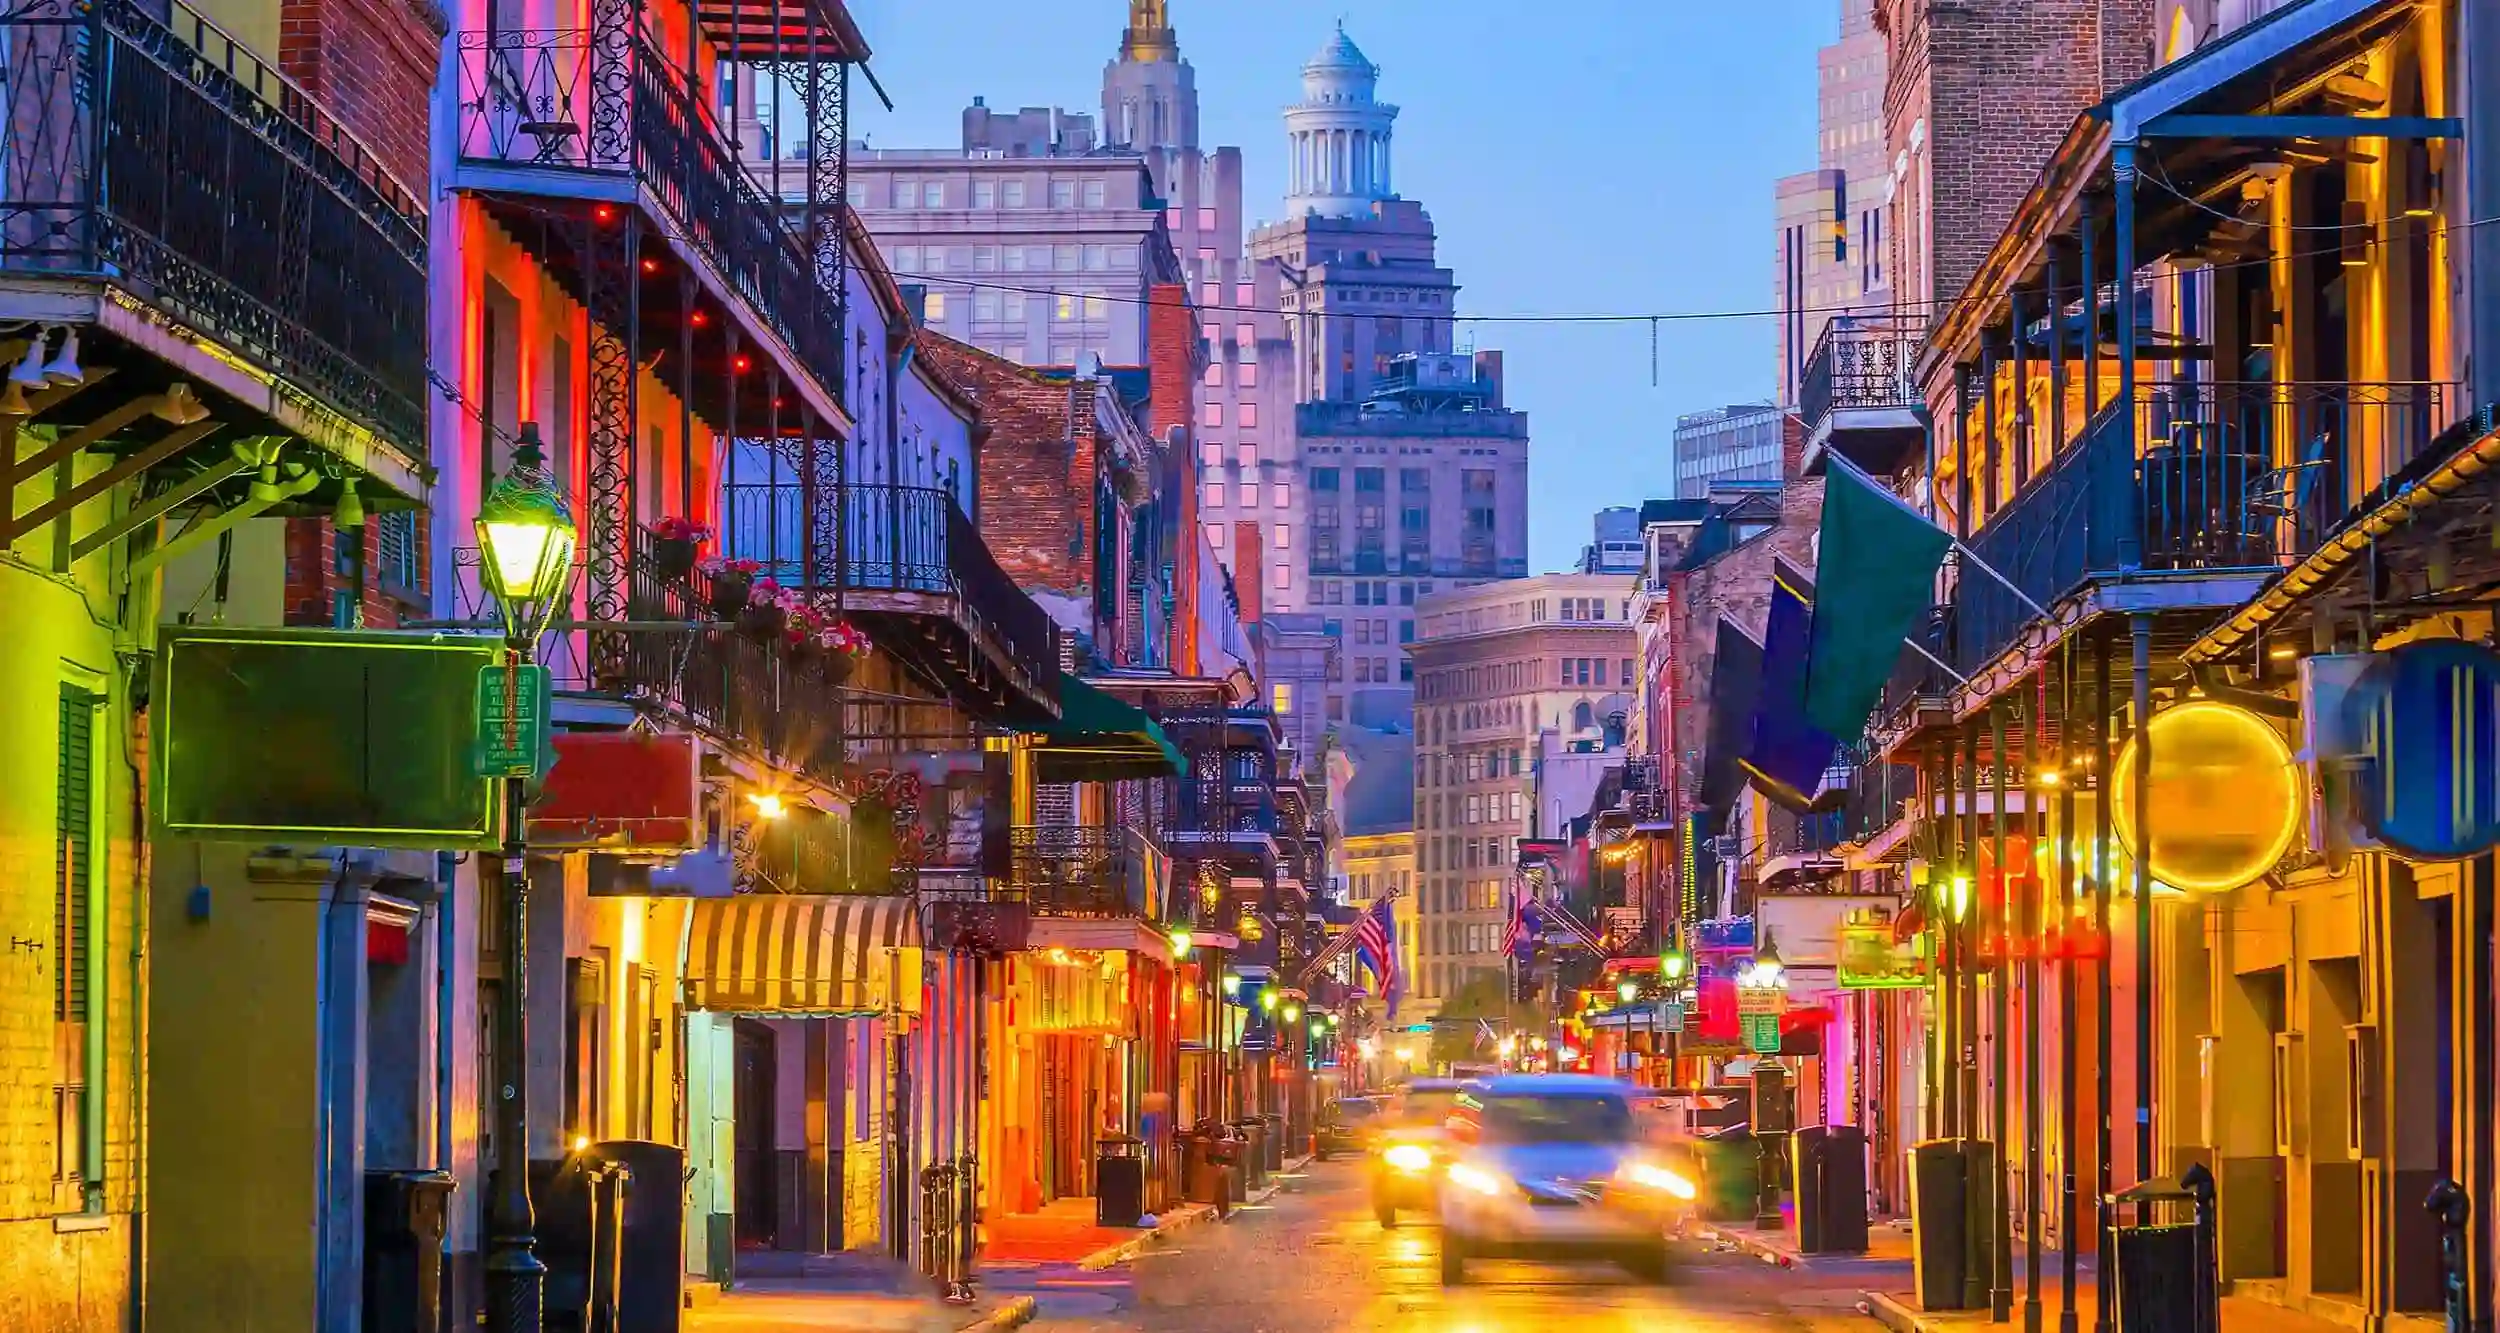 15 Unique Off The Beaten Path Things to Do in New Orleans